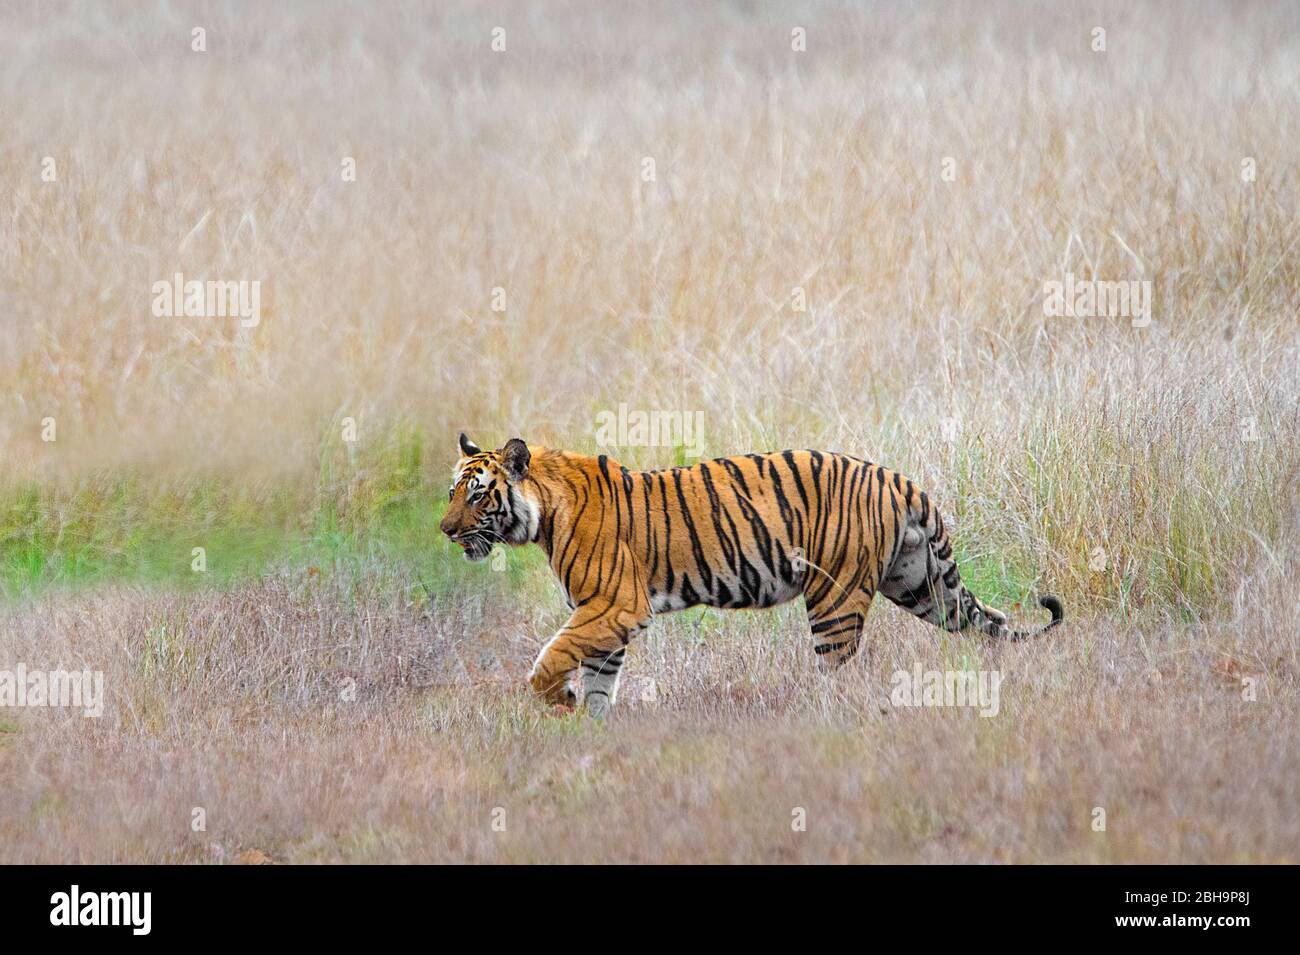 Bengal tiger amidst tall grass, India Stock Photo